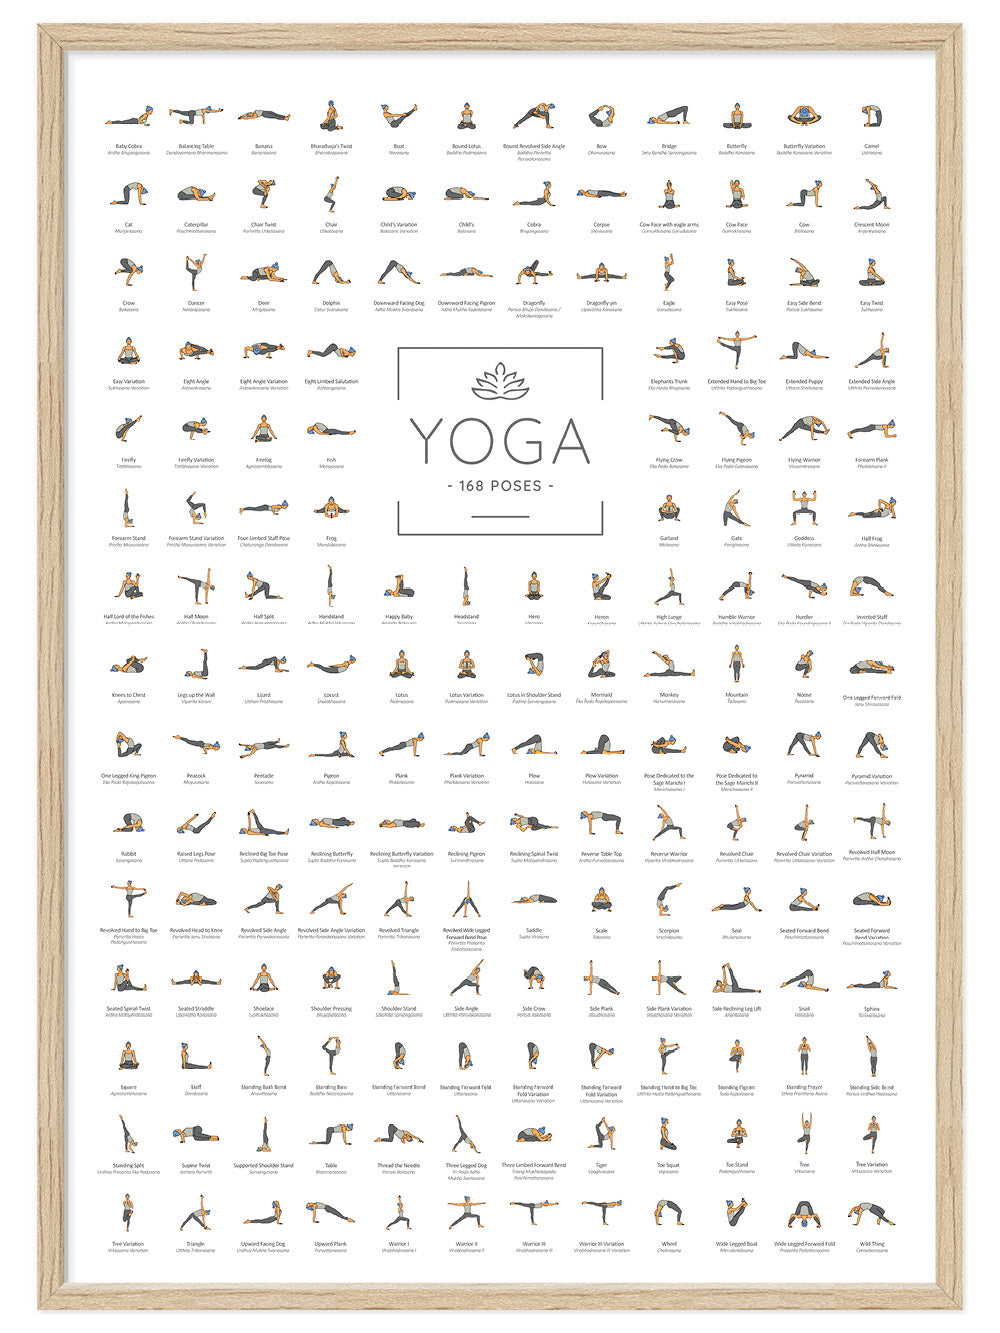 California Wellness Products Yoga Poster Series - Top 362 Best Yoga Poses  Poster - Relieve Stress, Increase Flexibility, Gain Strength | Yoga Postures  & Exercises, Size: 15